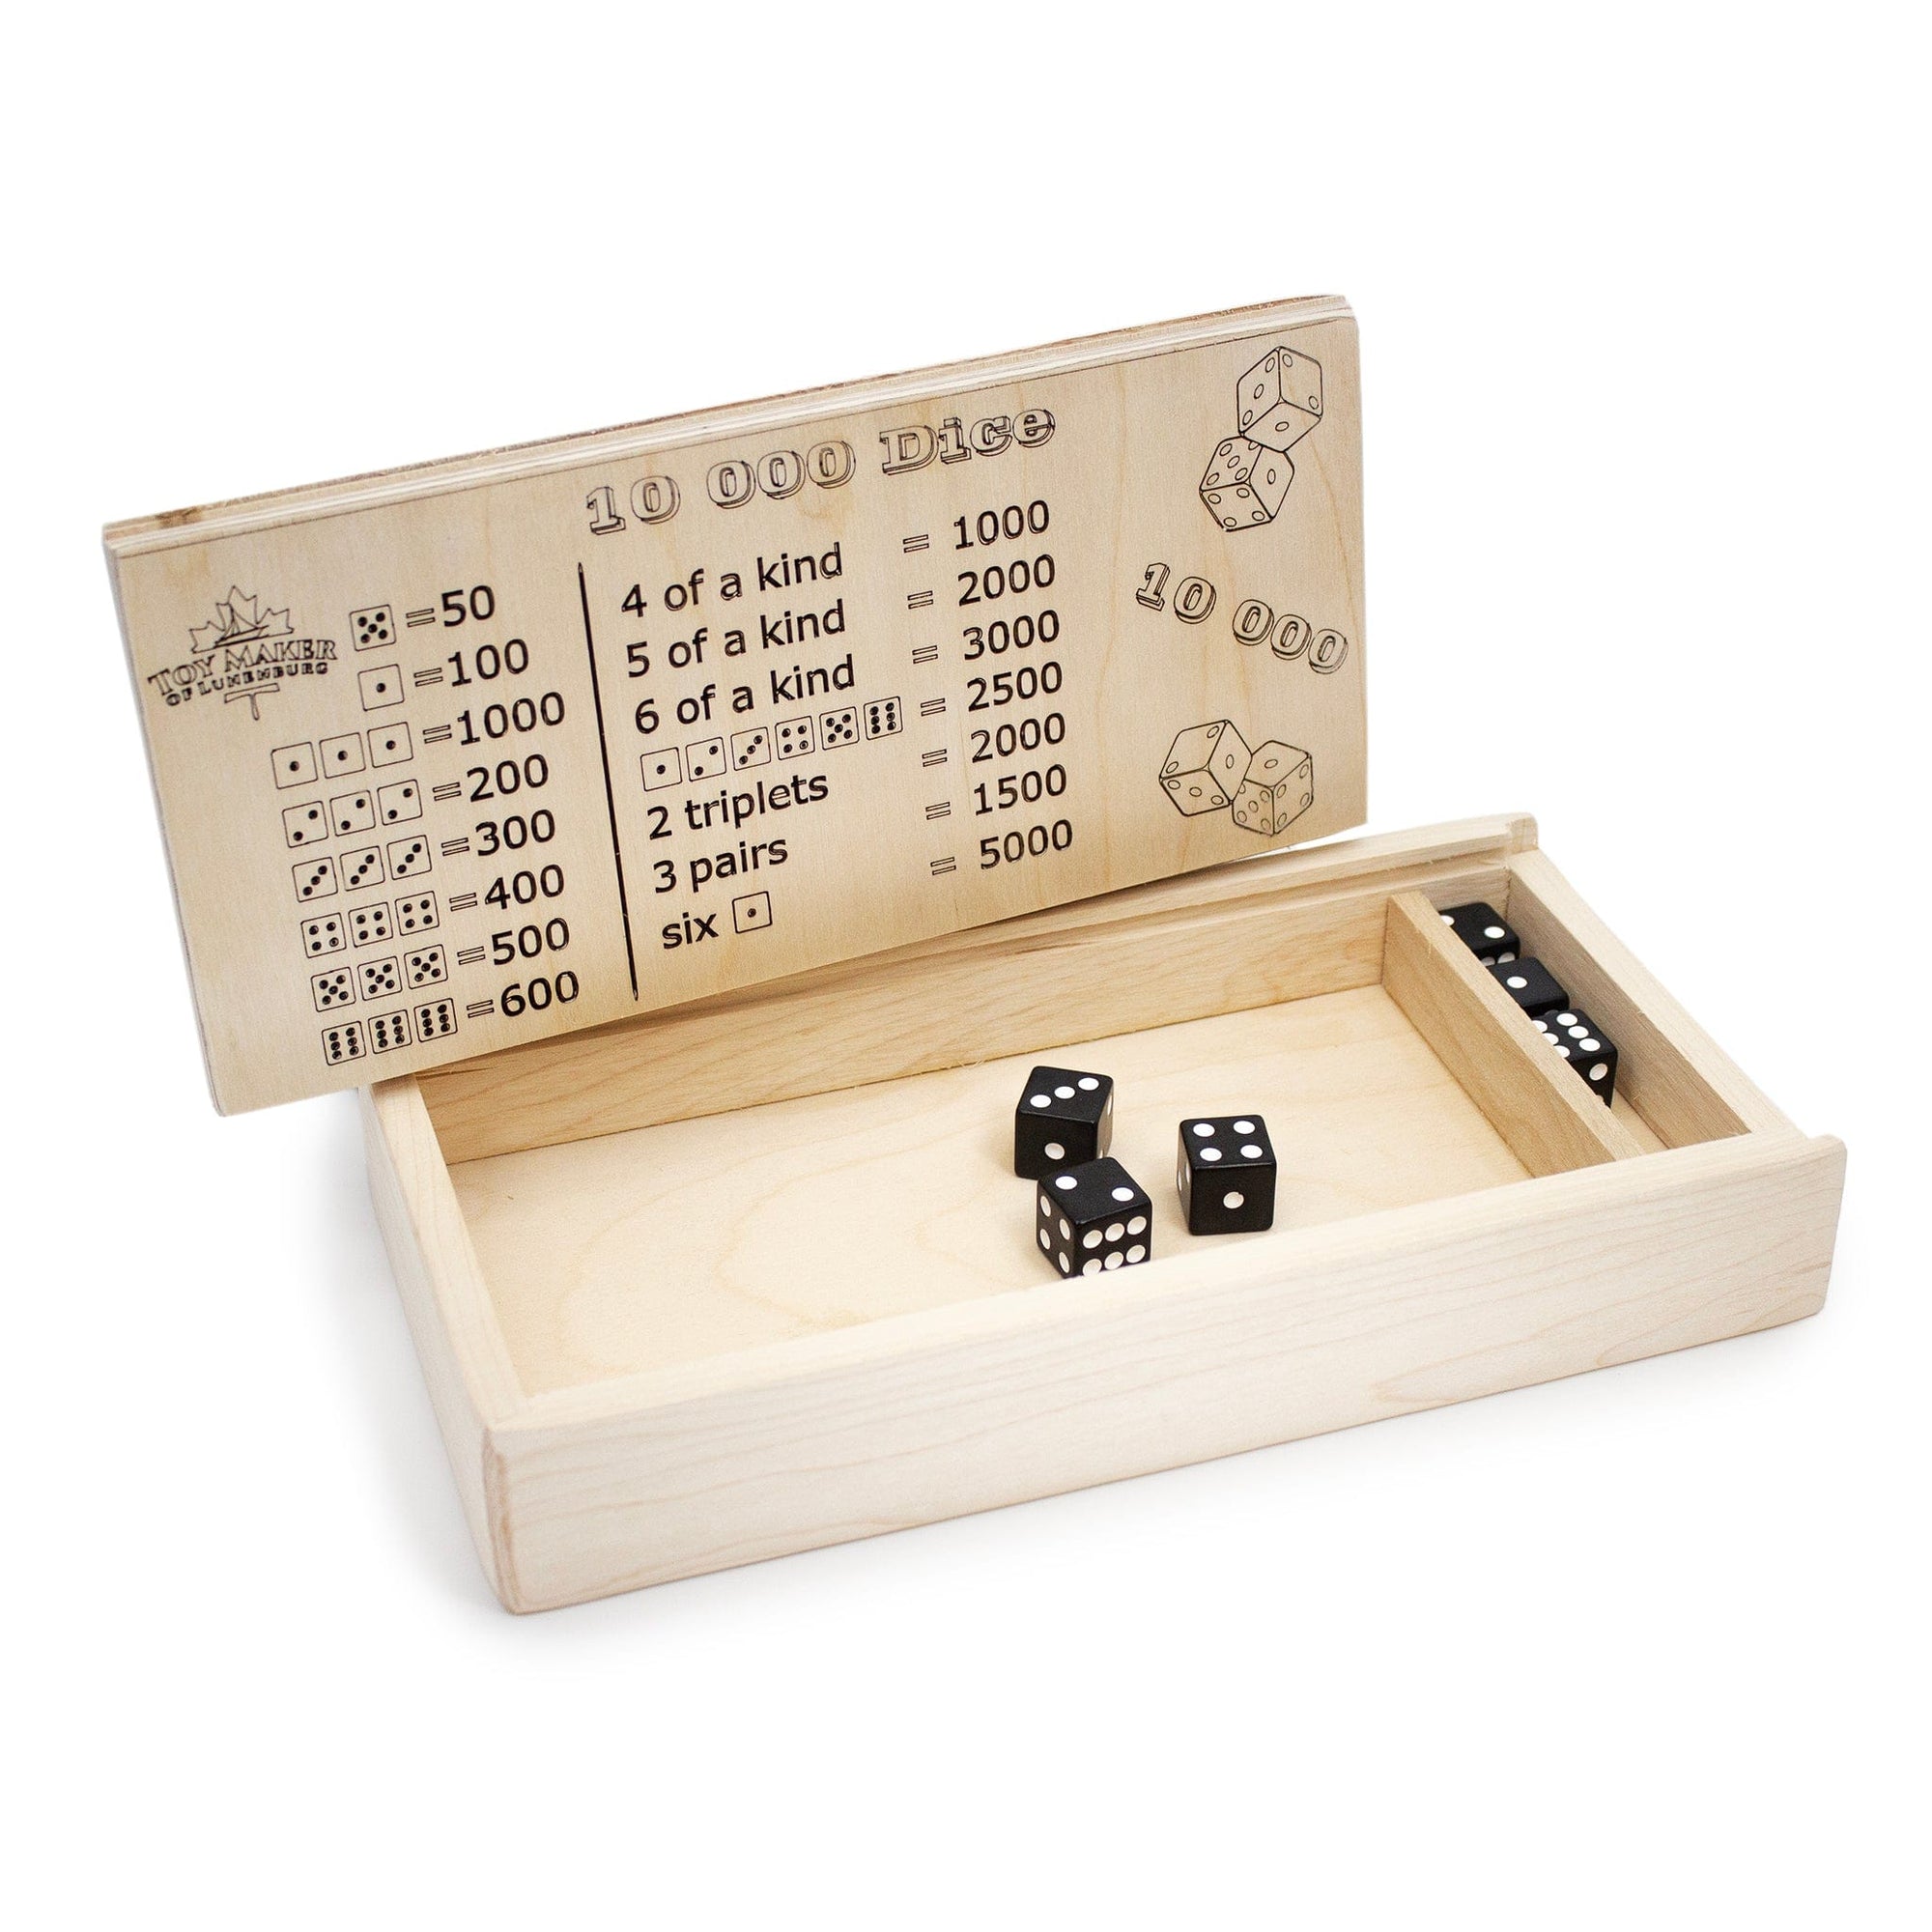 Toy Maker of Lunenburg Game 10,000 Dice Game with Tray Box